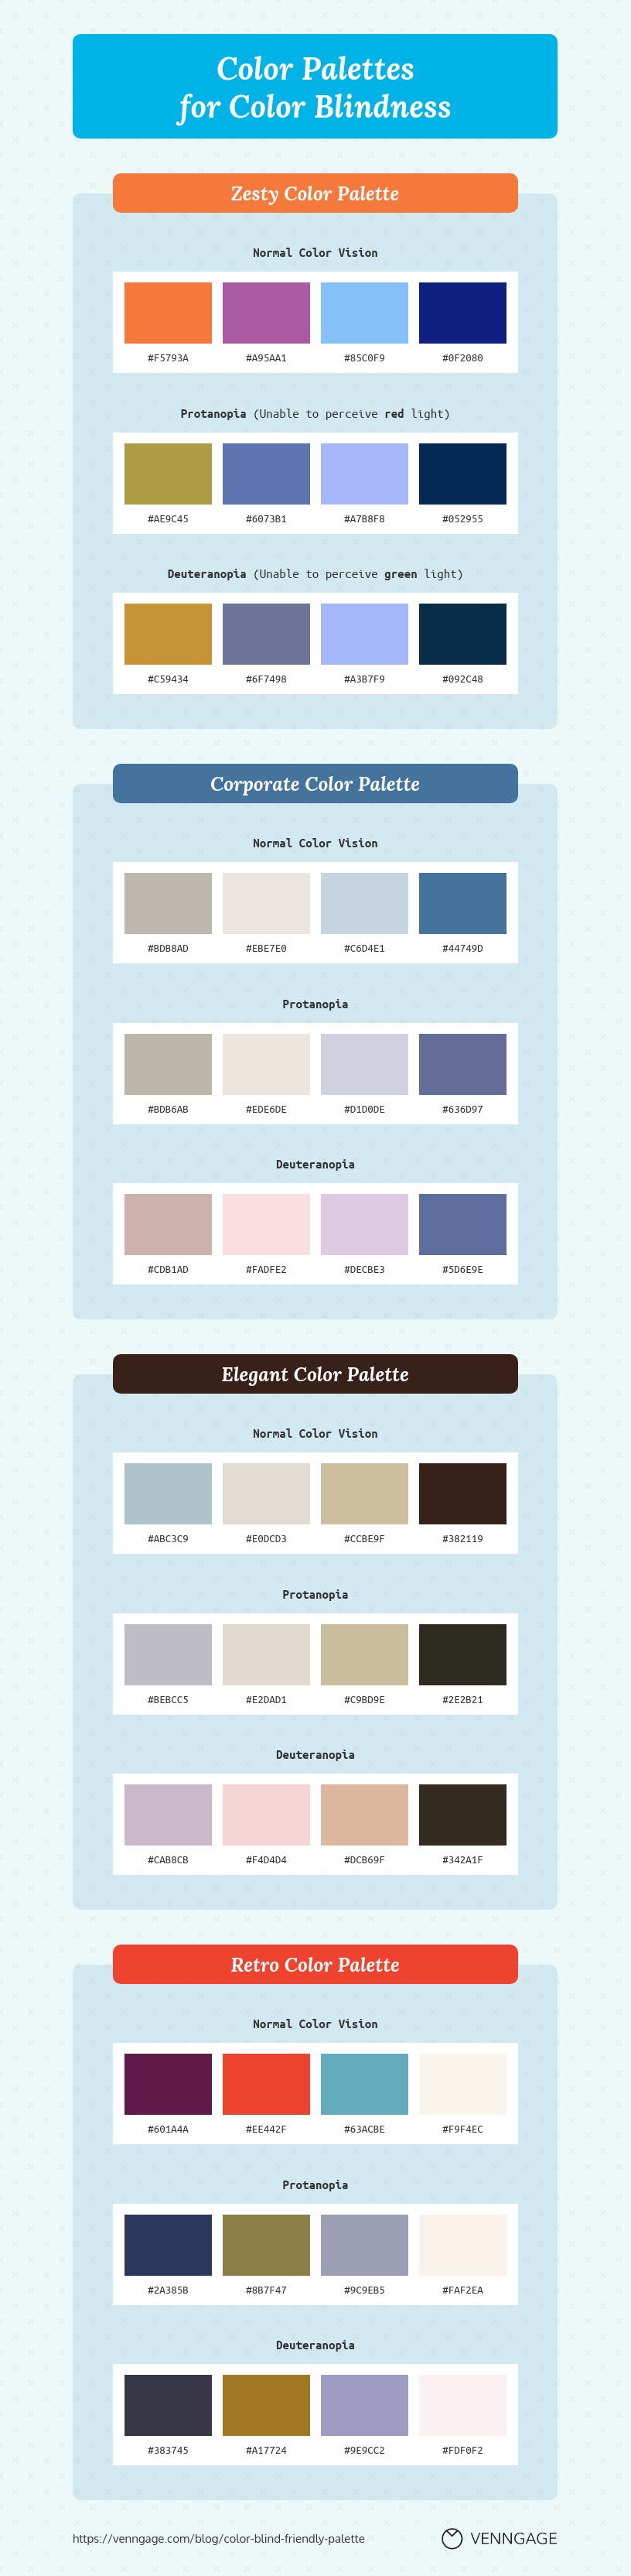 Color Palettes for Color Blindness Infographic